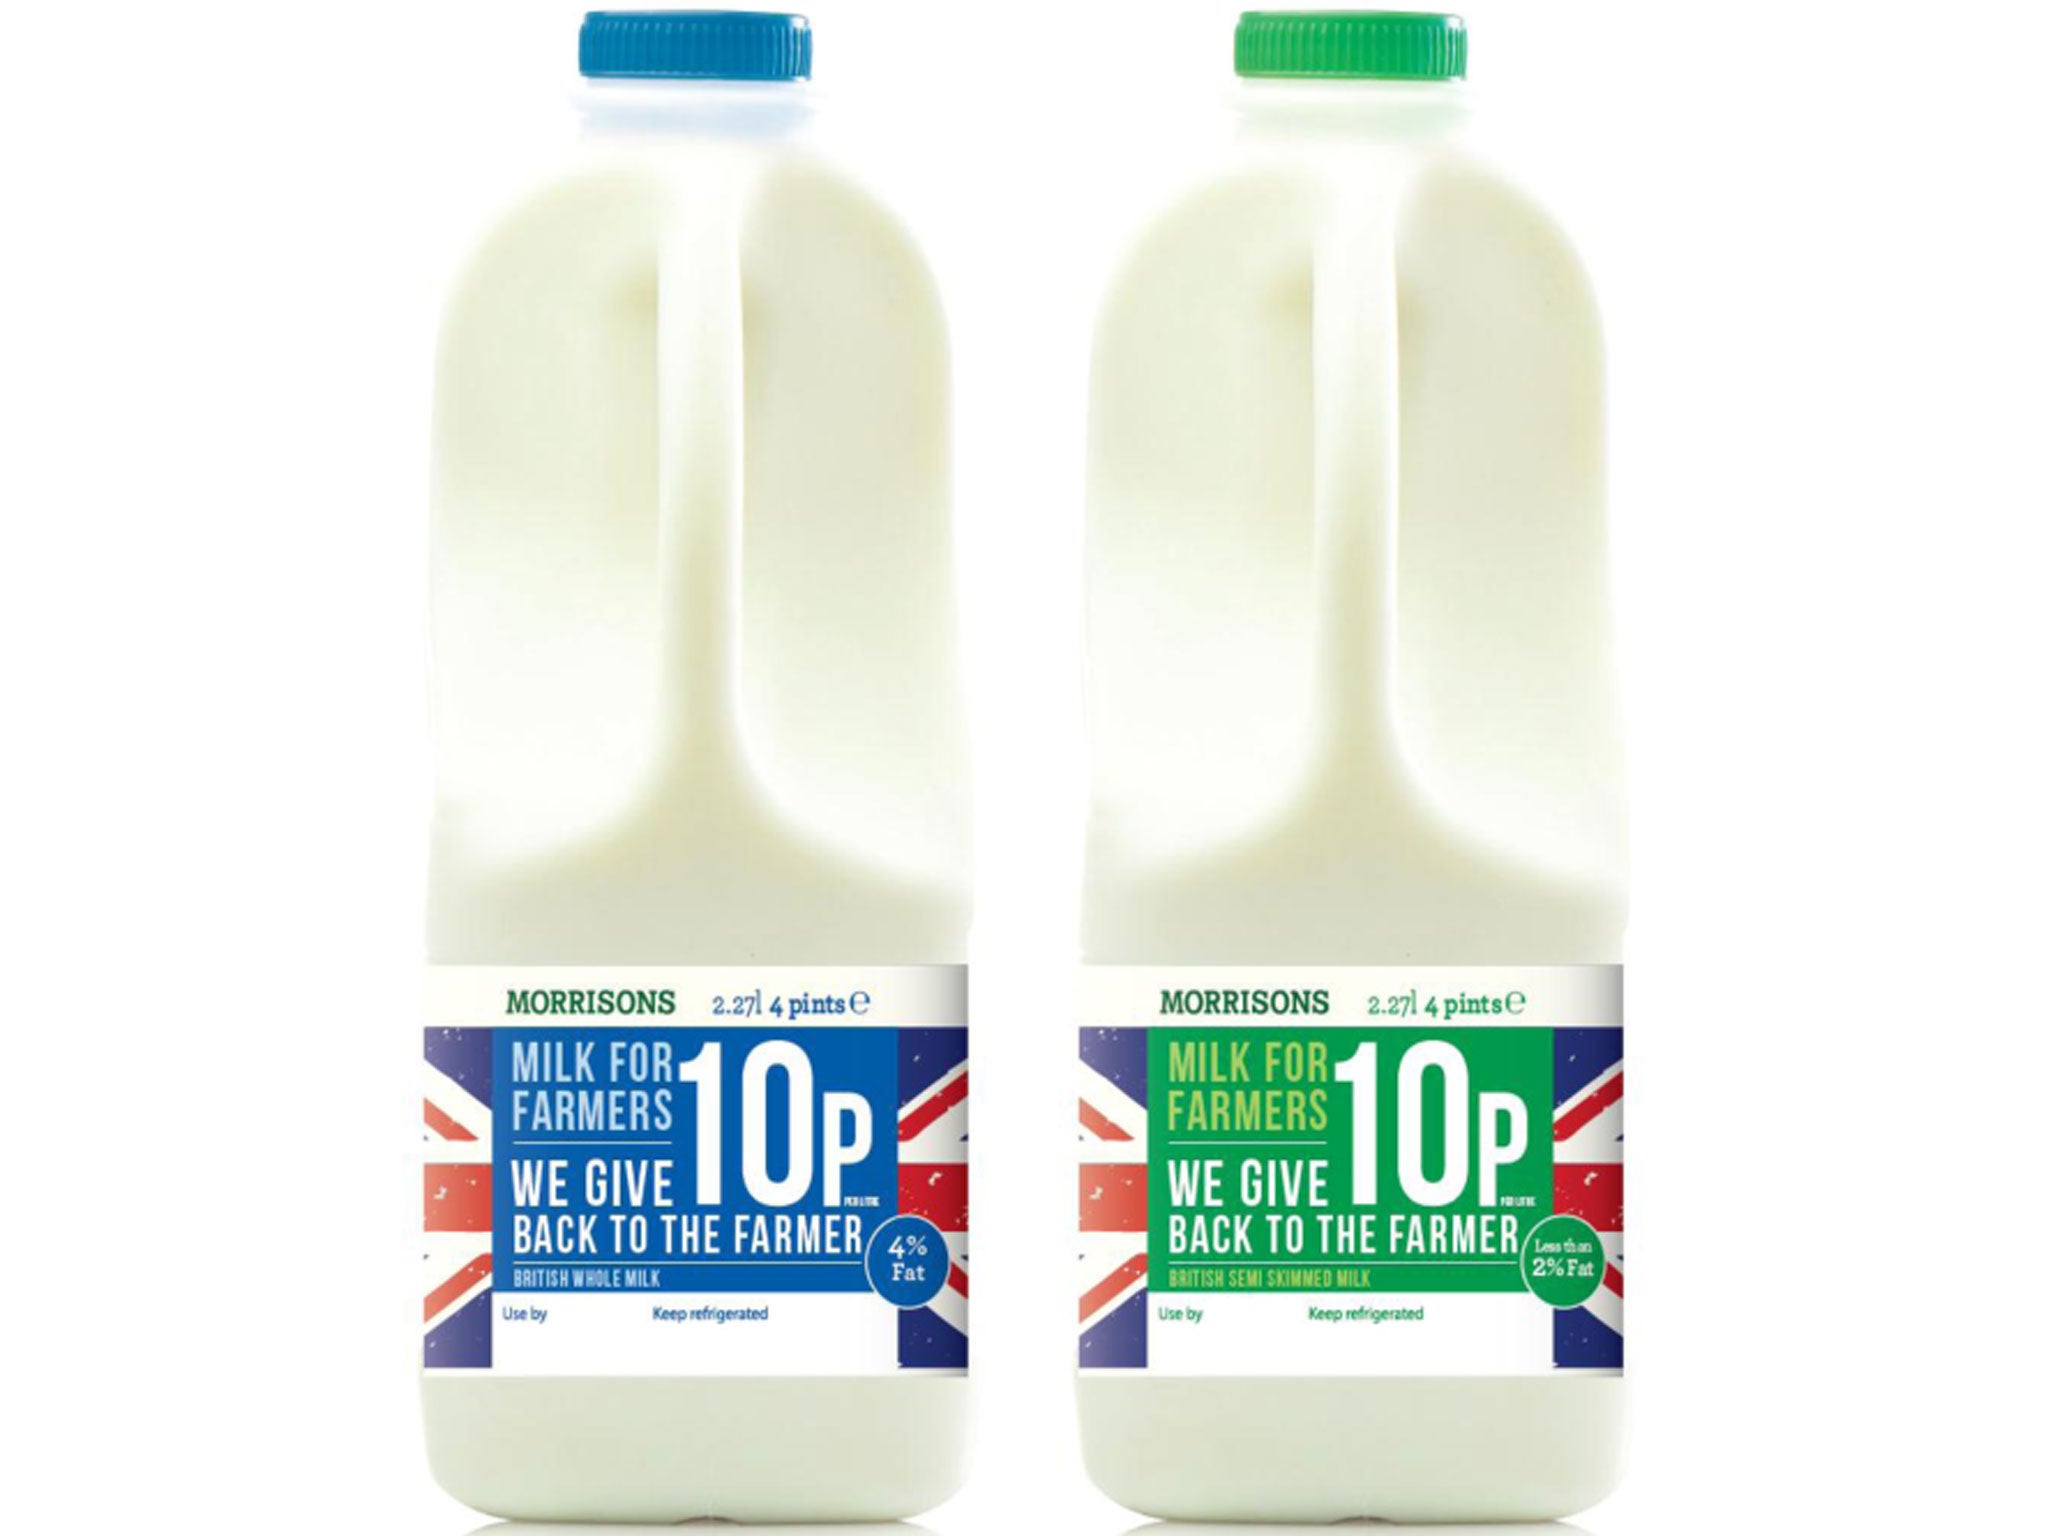 Morrisons new 'Milk for Farmers' brand will pass on 10p-per-litre directly to UK dairy farmers